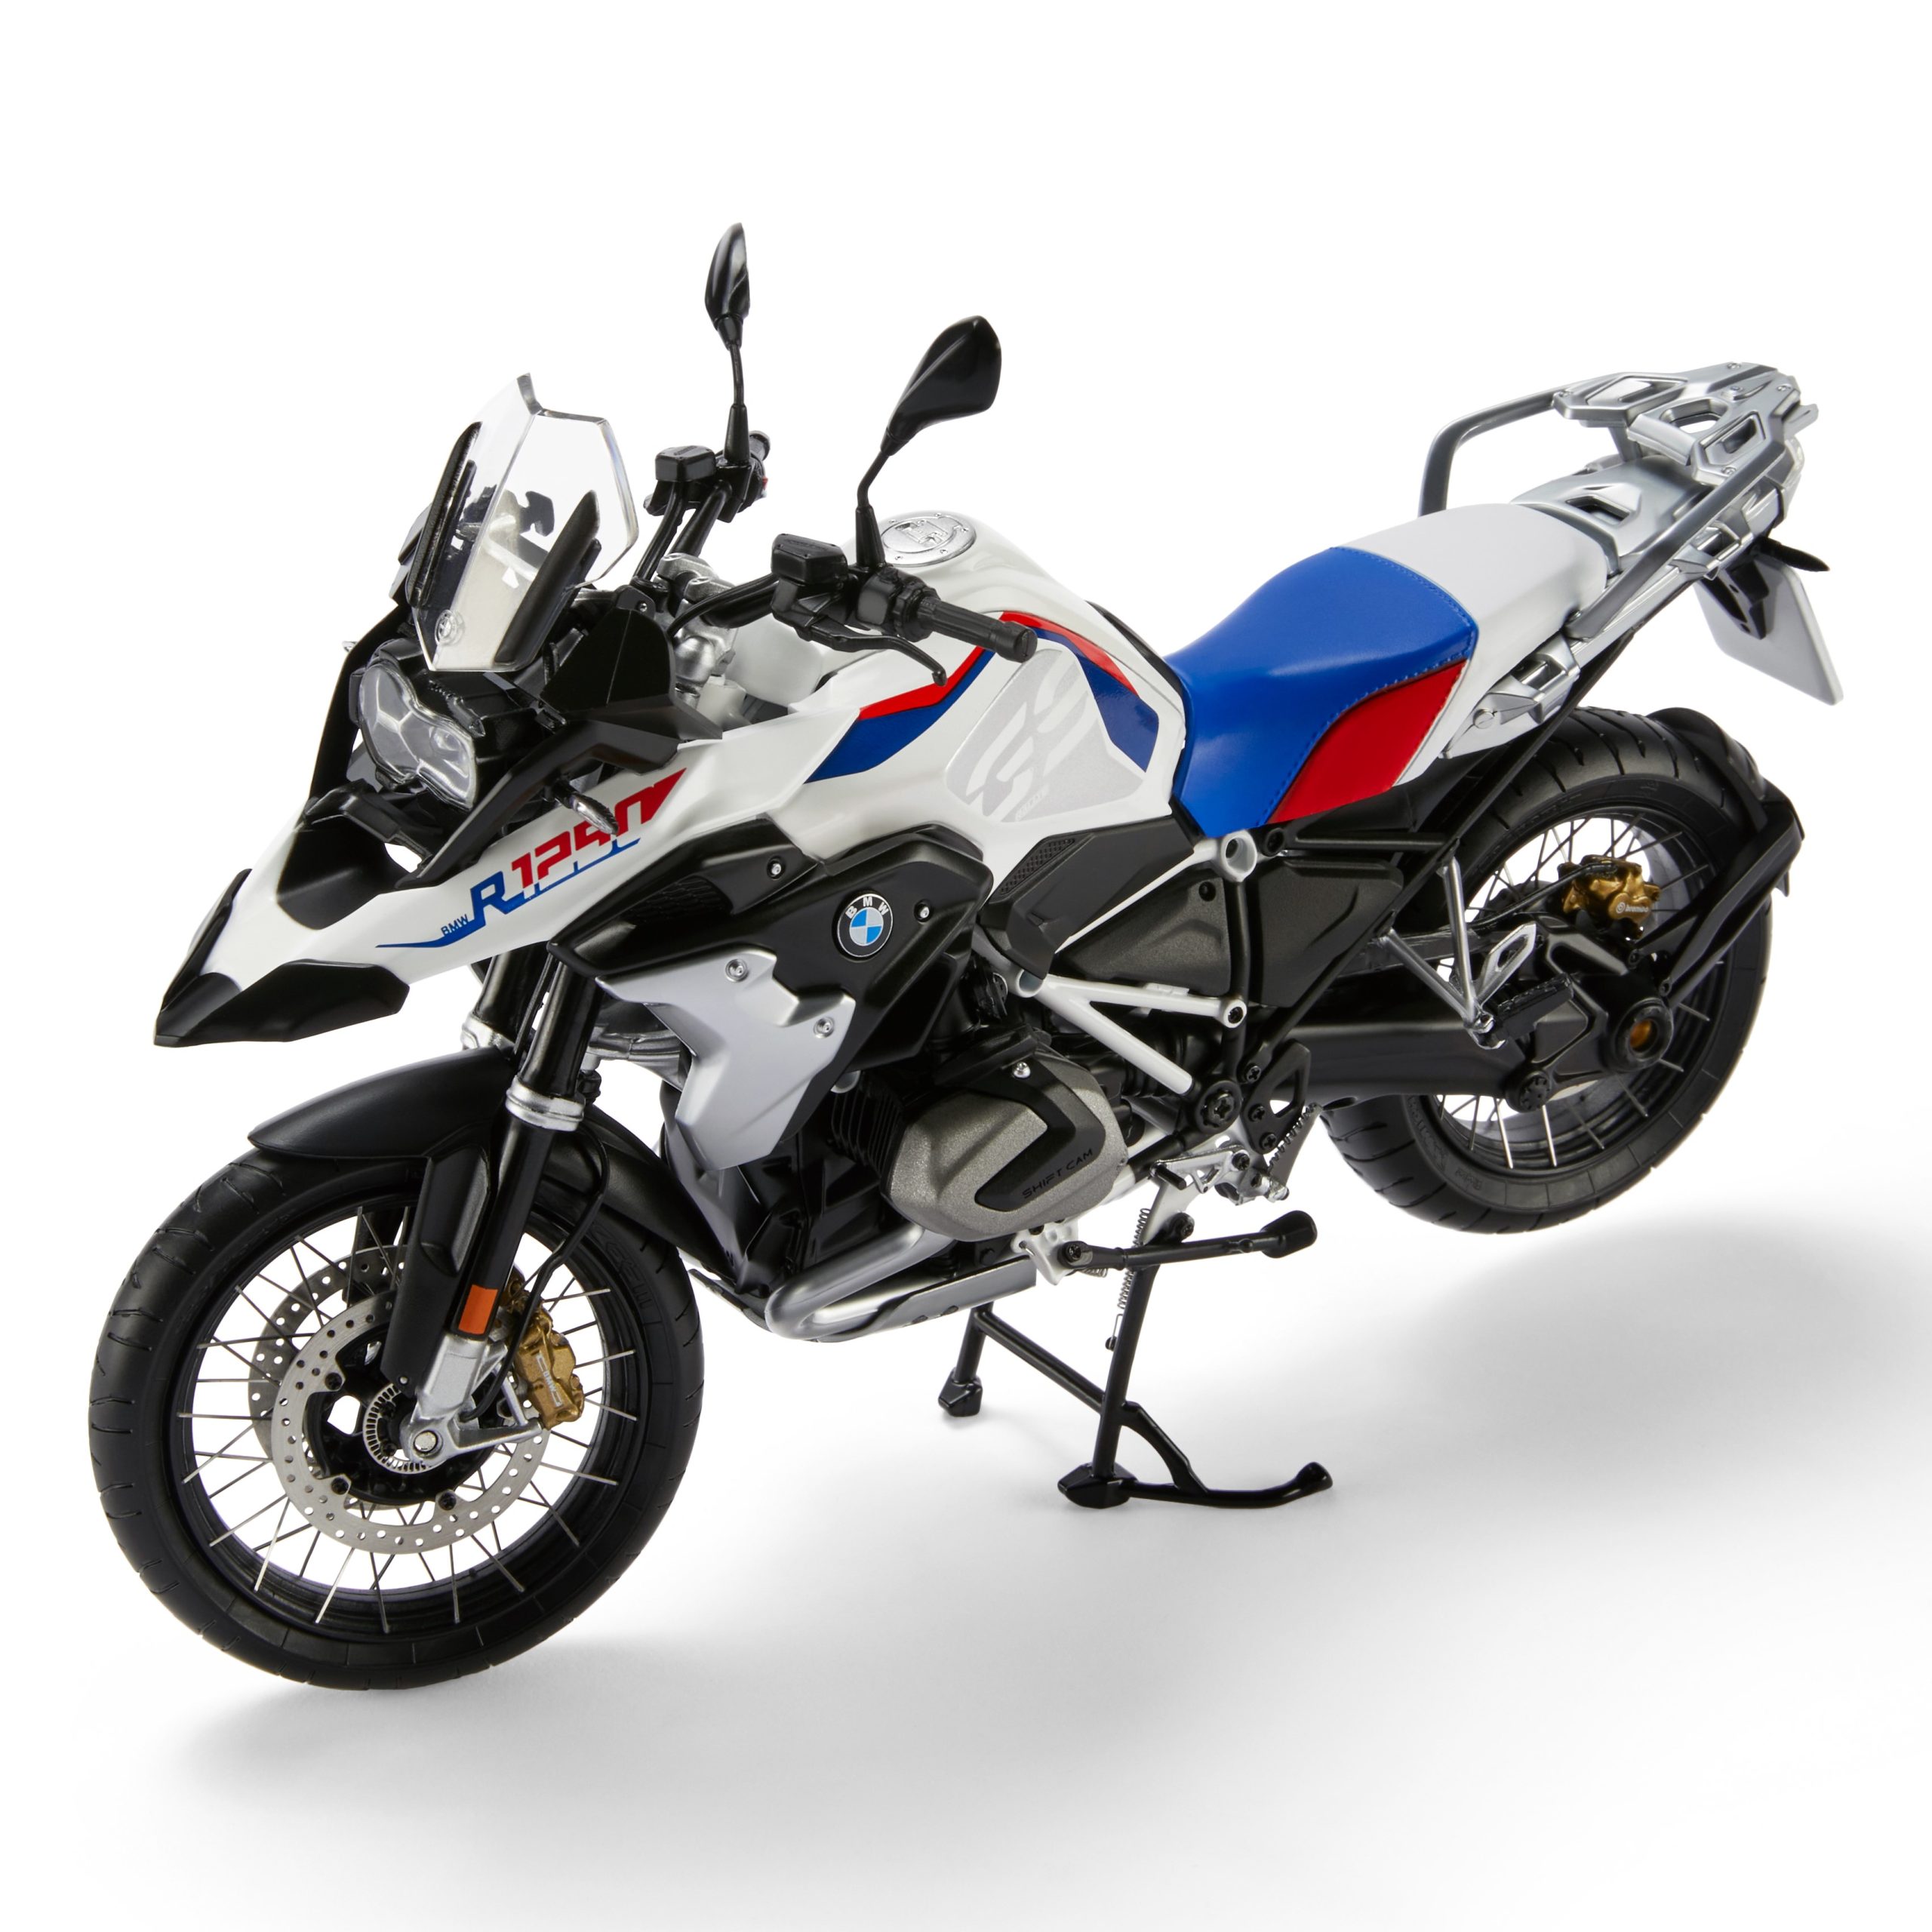 BMW R 1250 GS 40 Years GS Edition first ride, review - Introduction